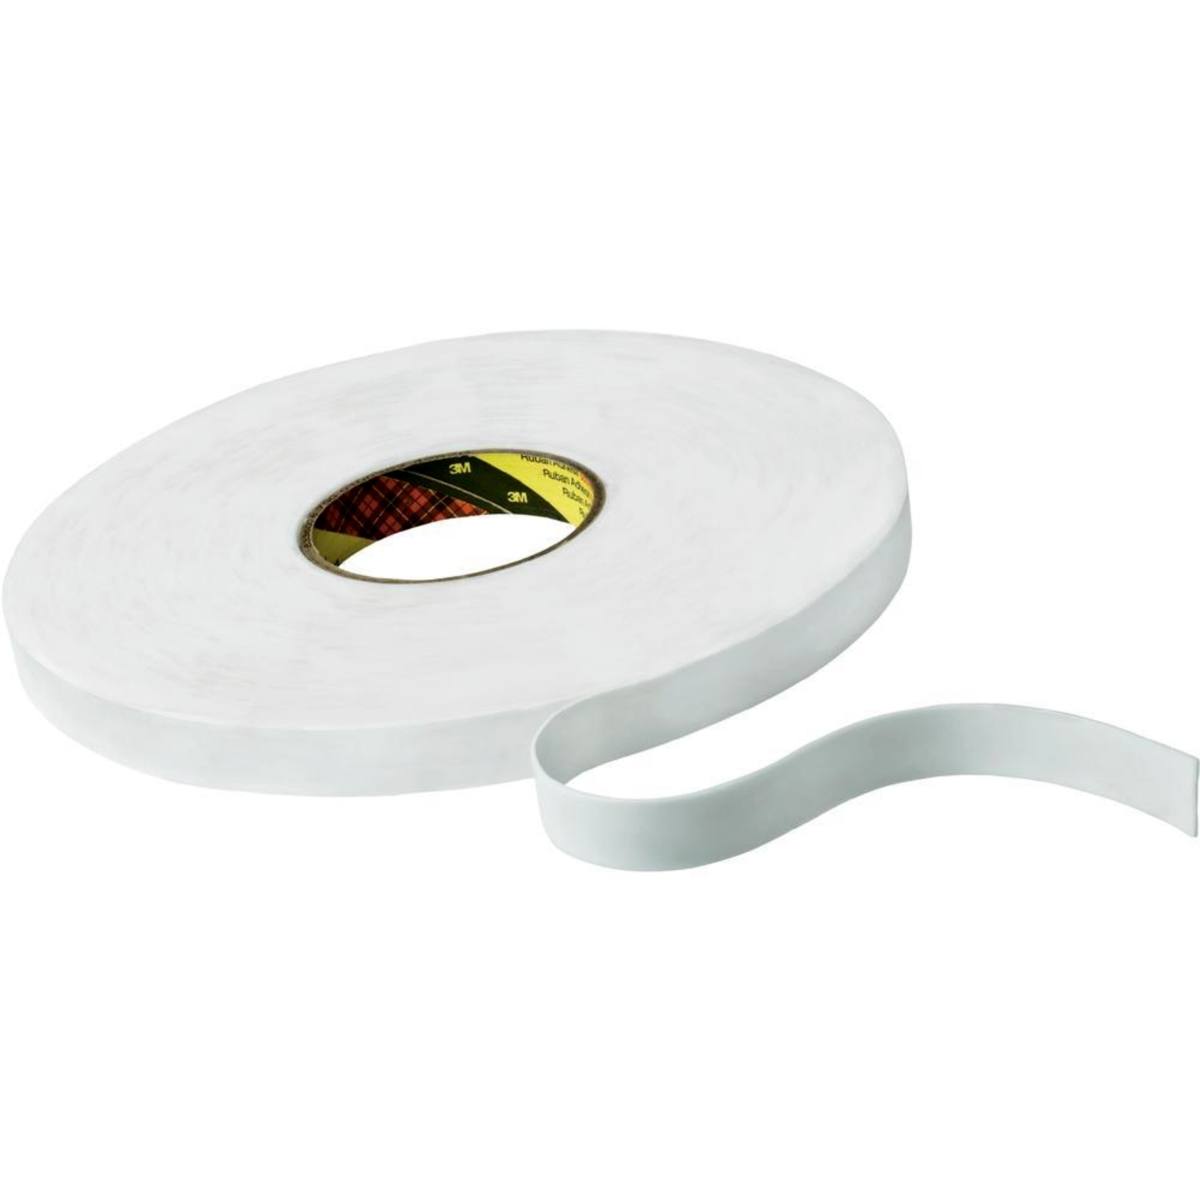 3M Double-sided PE foam tape with acrylic adhesive 9508W, white, 12 mm x 66 m, 0.8 mm